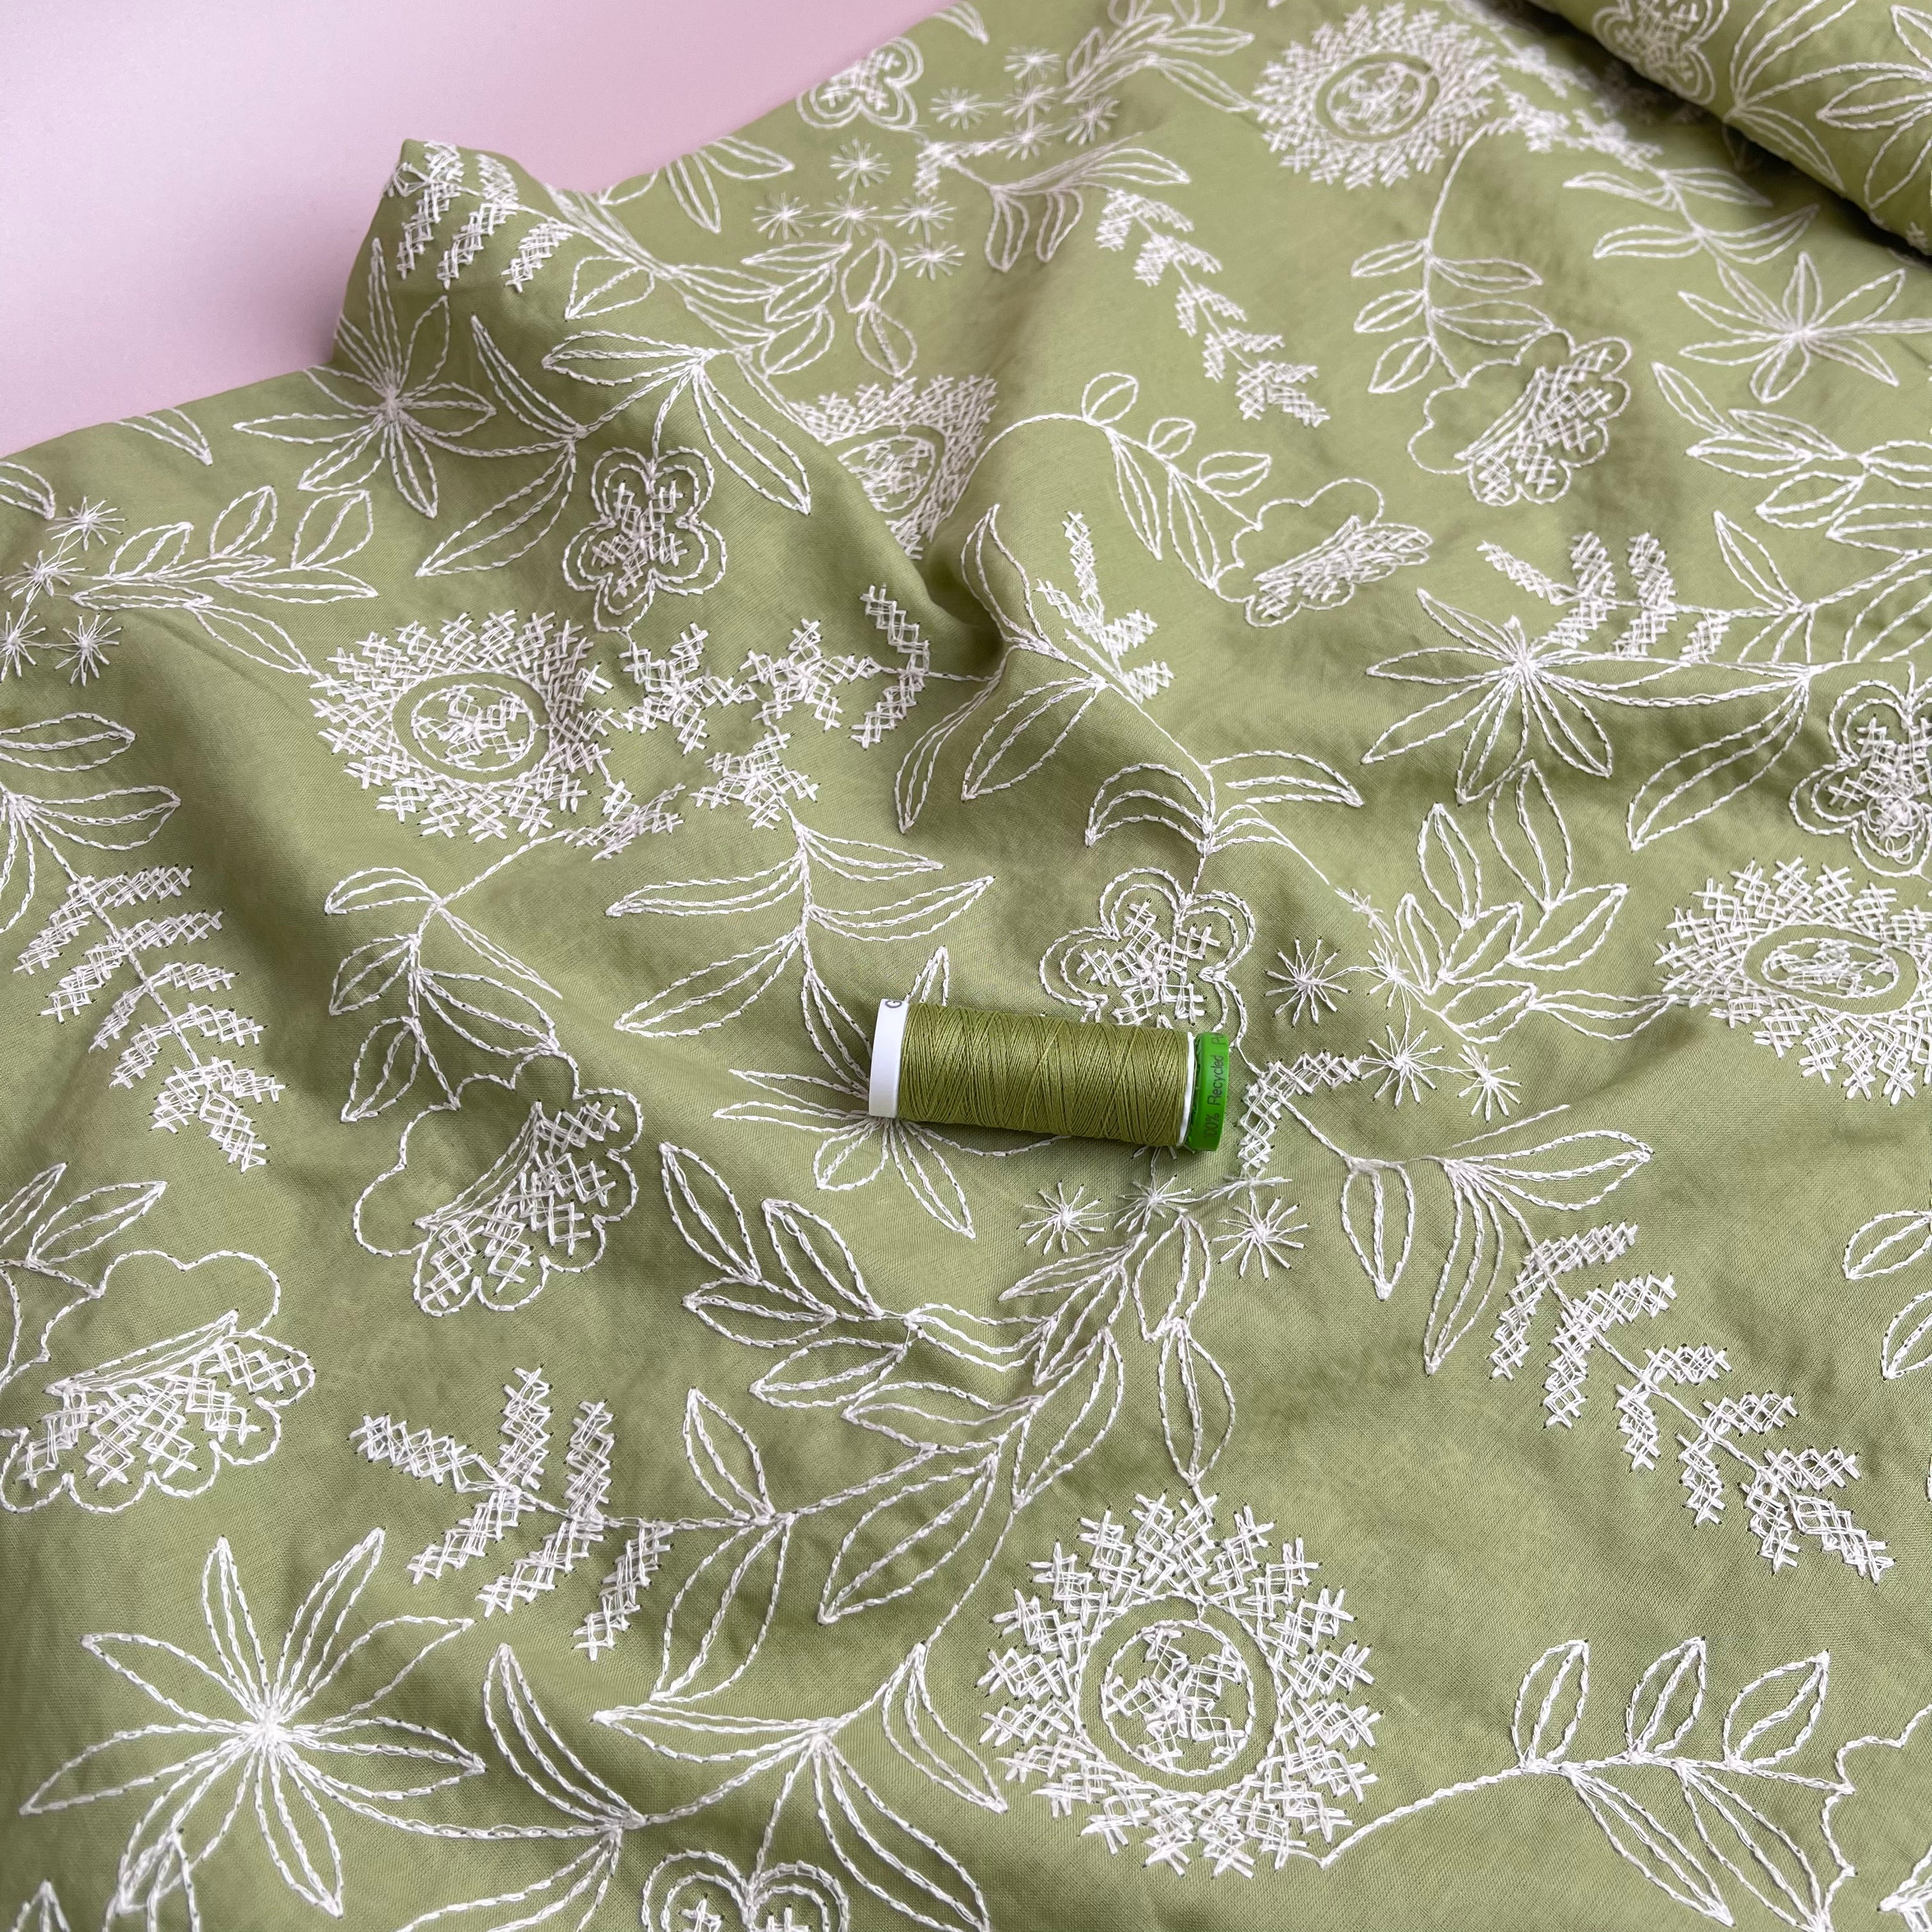 REMNANT 2.10 Metres - Embroidered Wildflowers on Spring Green Cotton Fabric